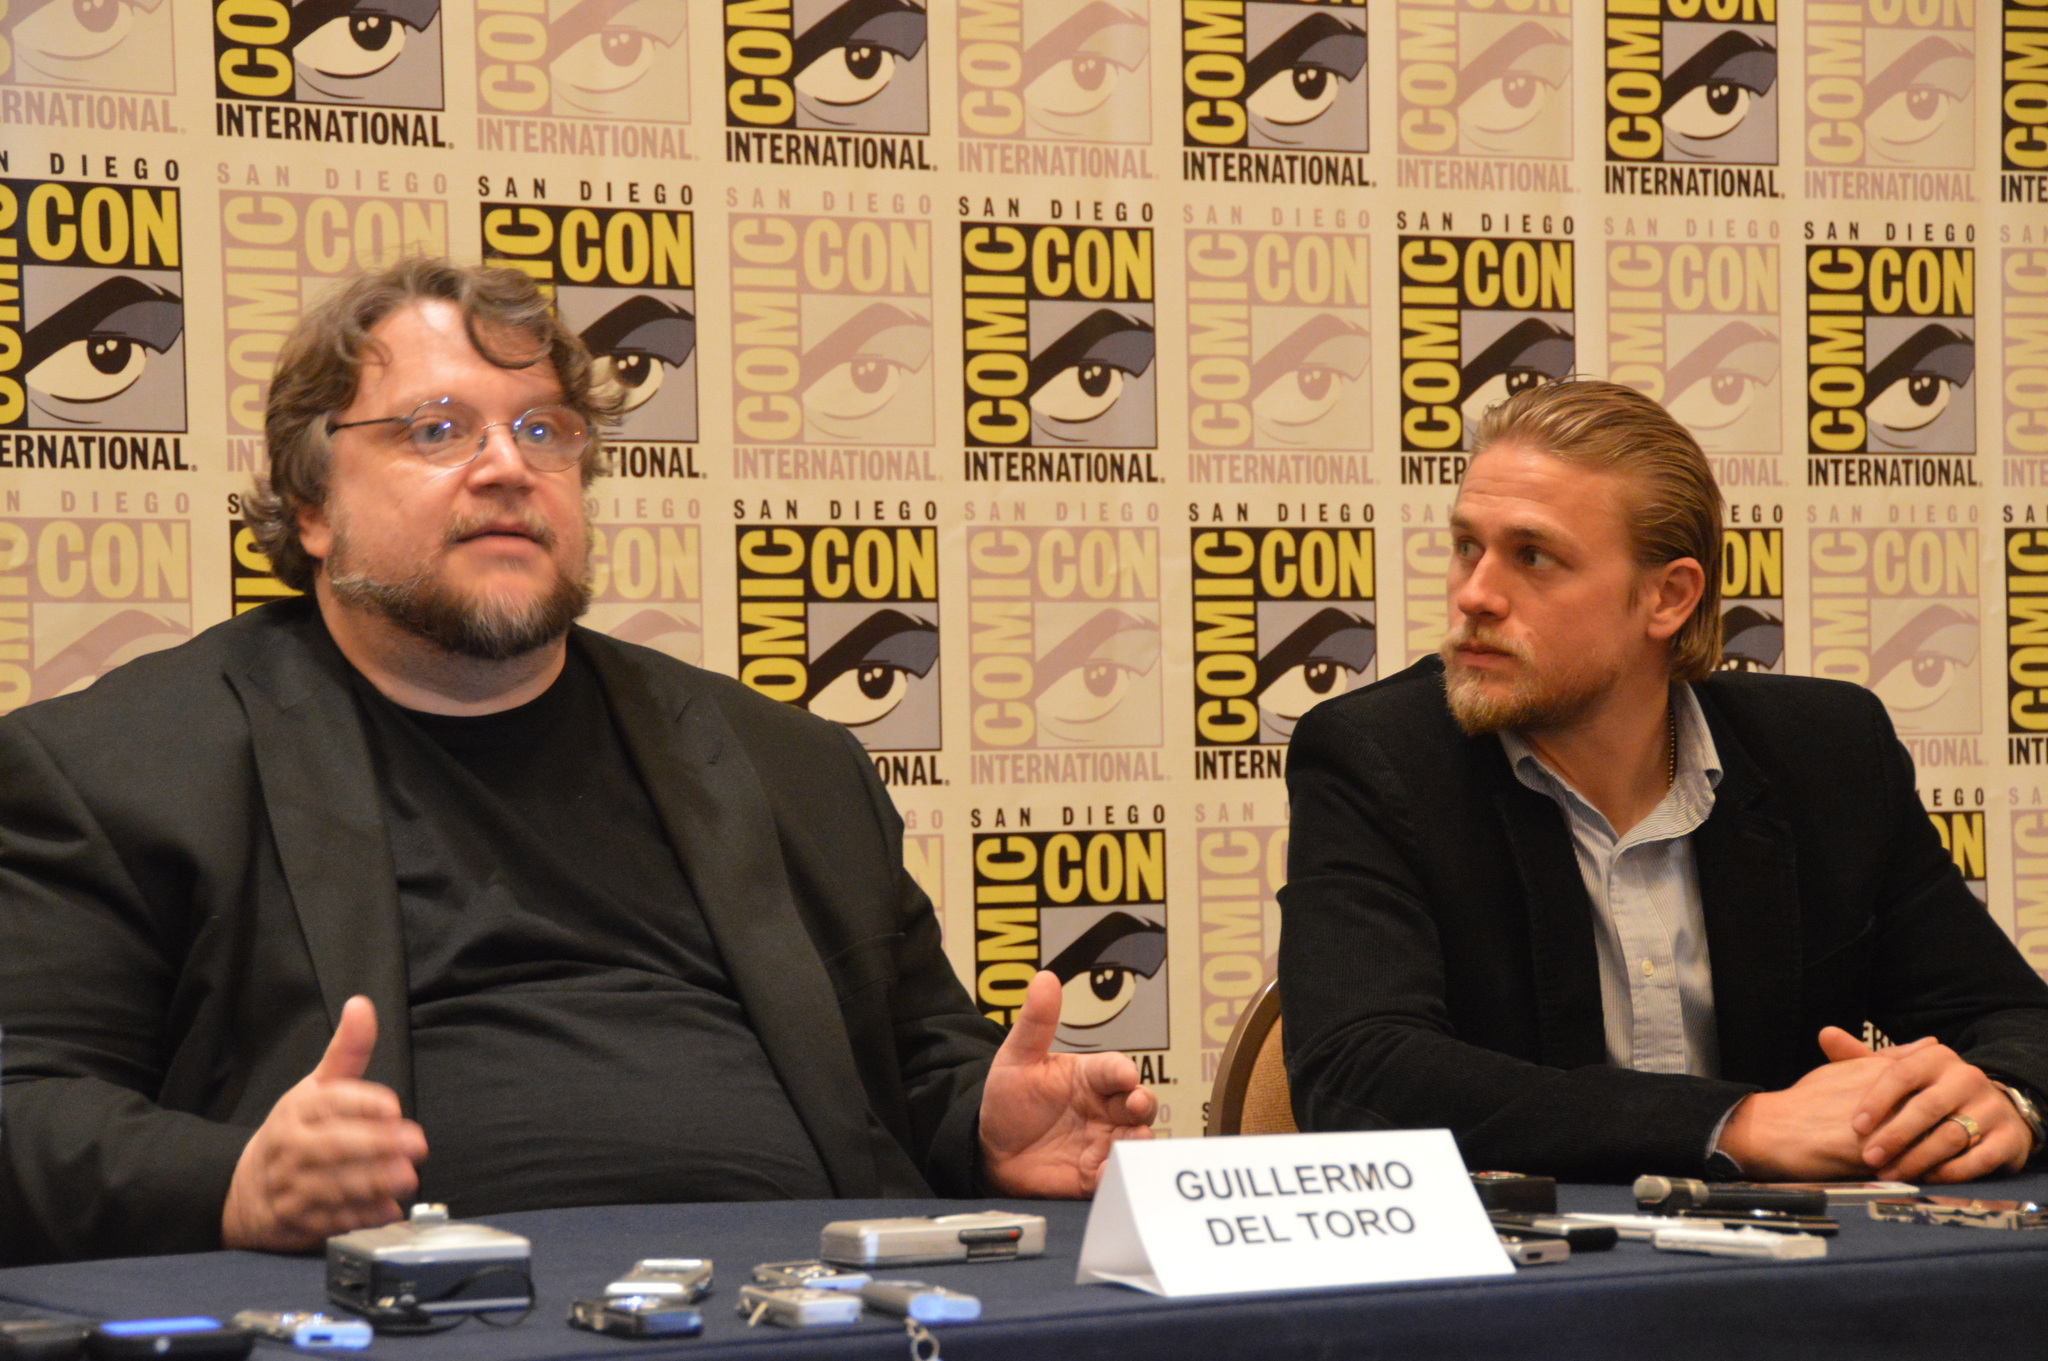 Charlie Hunnam and Guillermo del Toro at event of Ugnies ziedas (2013)